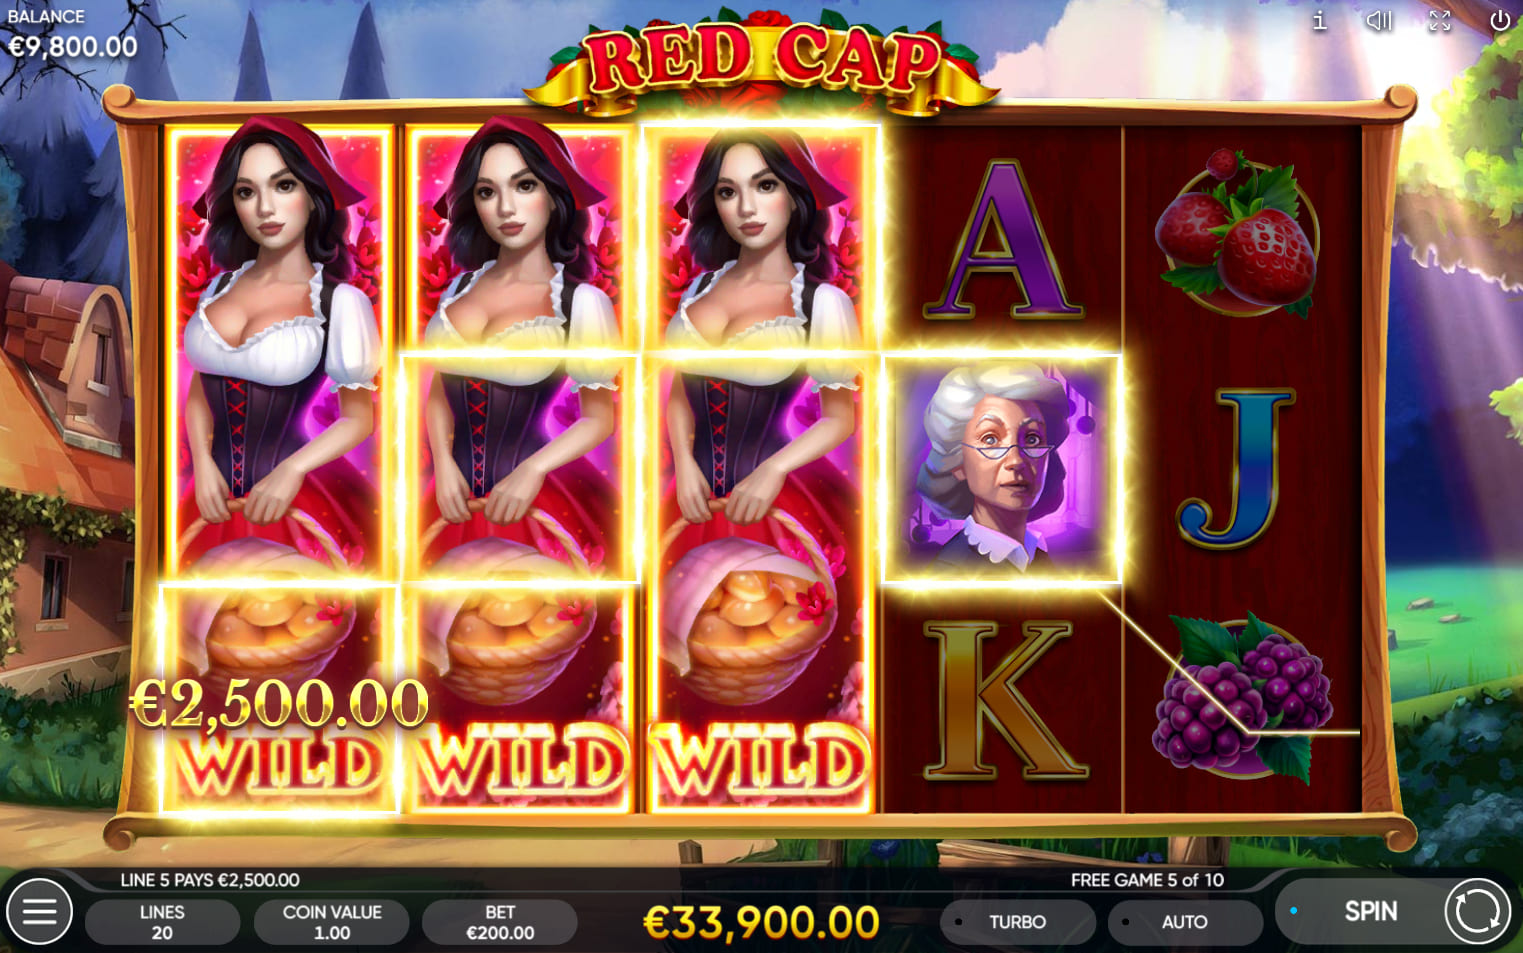 Red Cap Video Slot Review by Casinoid.in